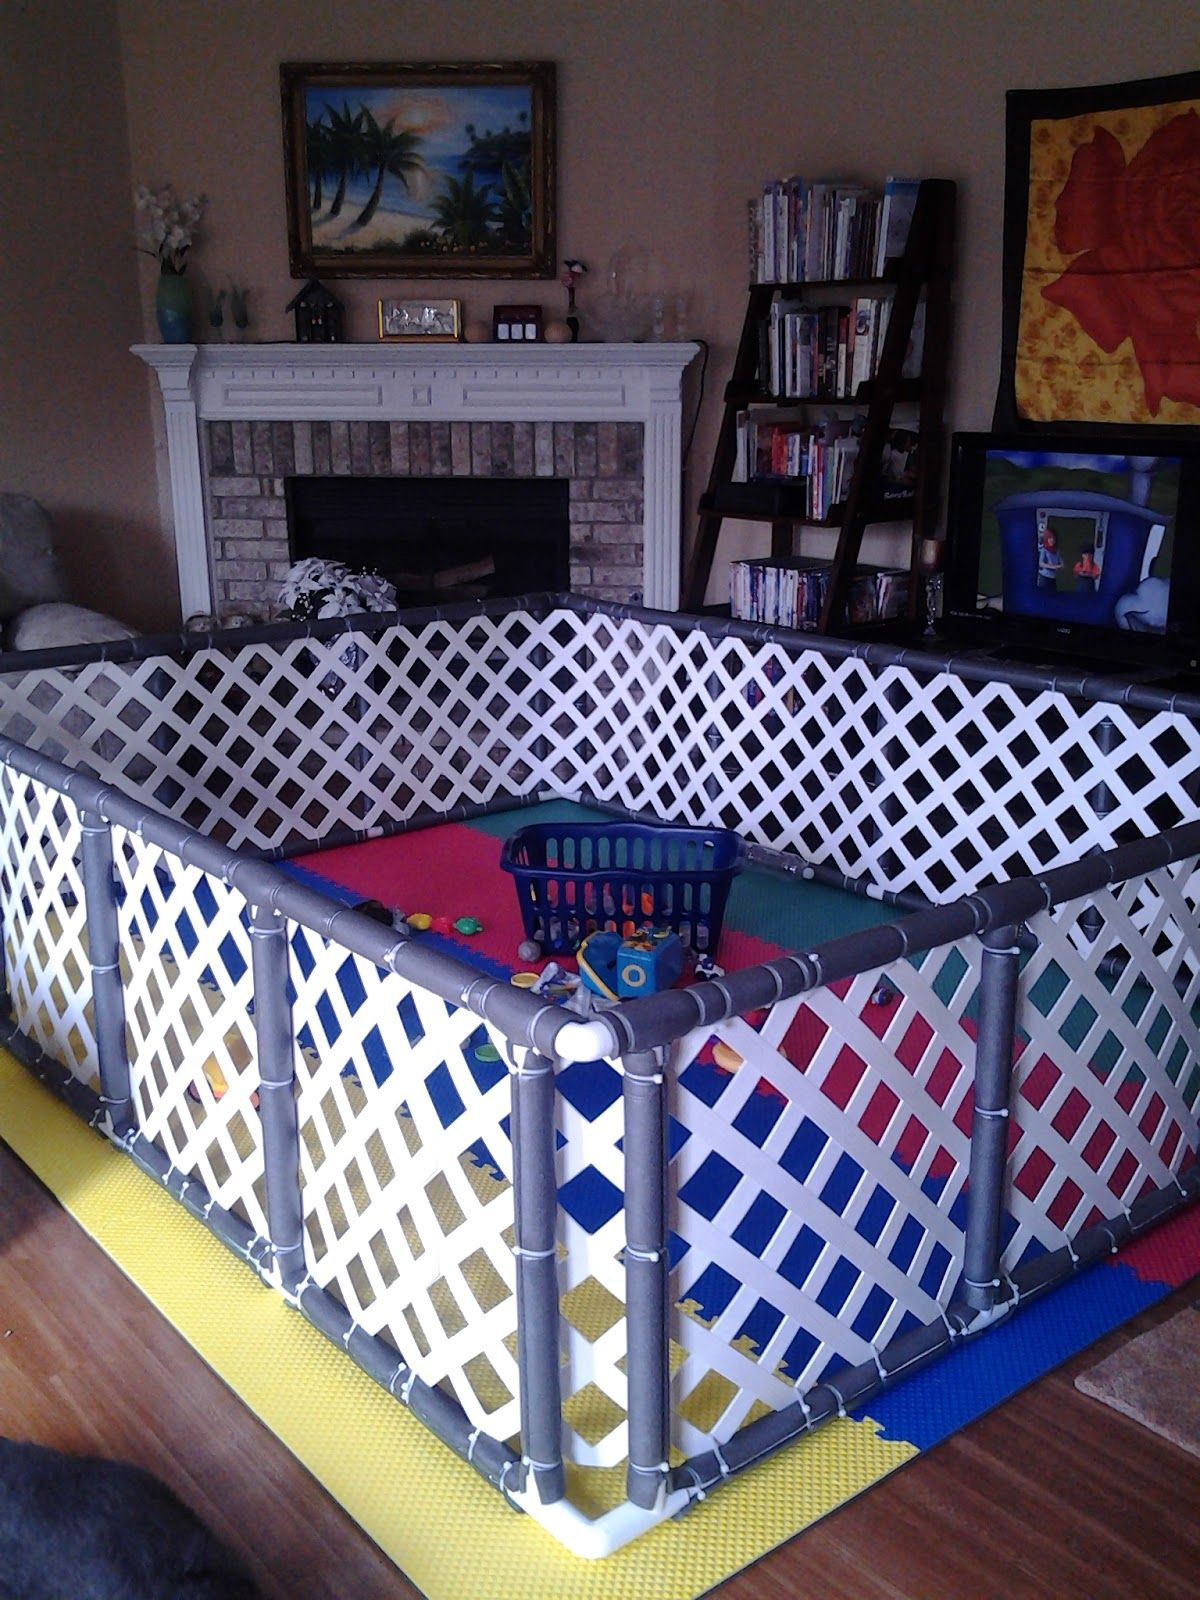 DIY Baby Play Yard
 Making of the deLUXe PlayPen